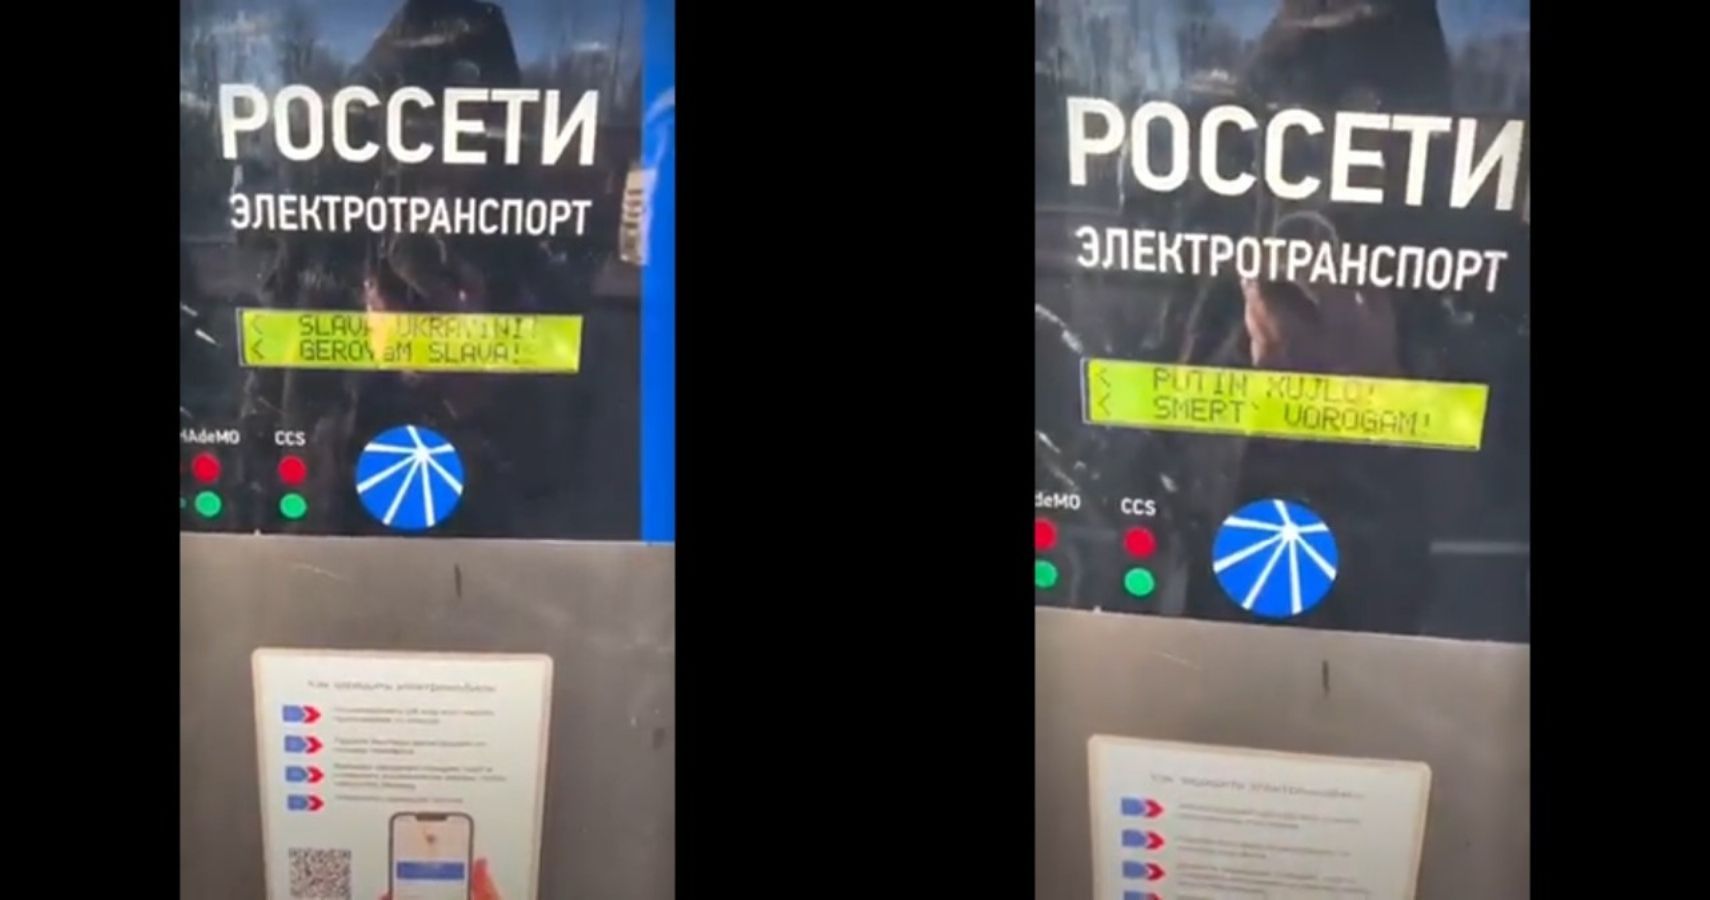 Hacked charging stations displaying anti-Putin and pro-Ukranian messages